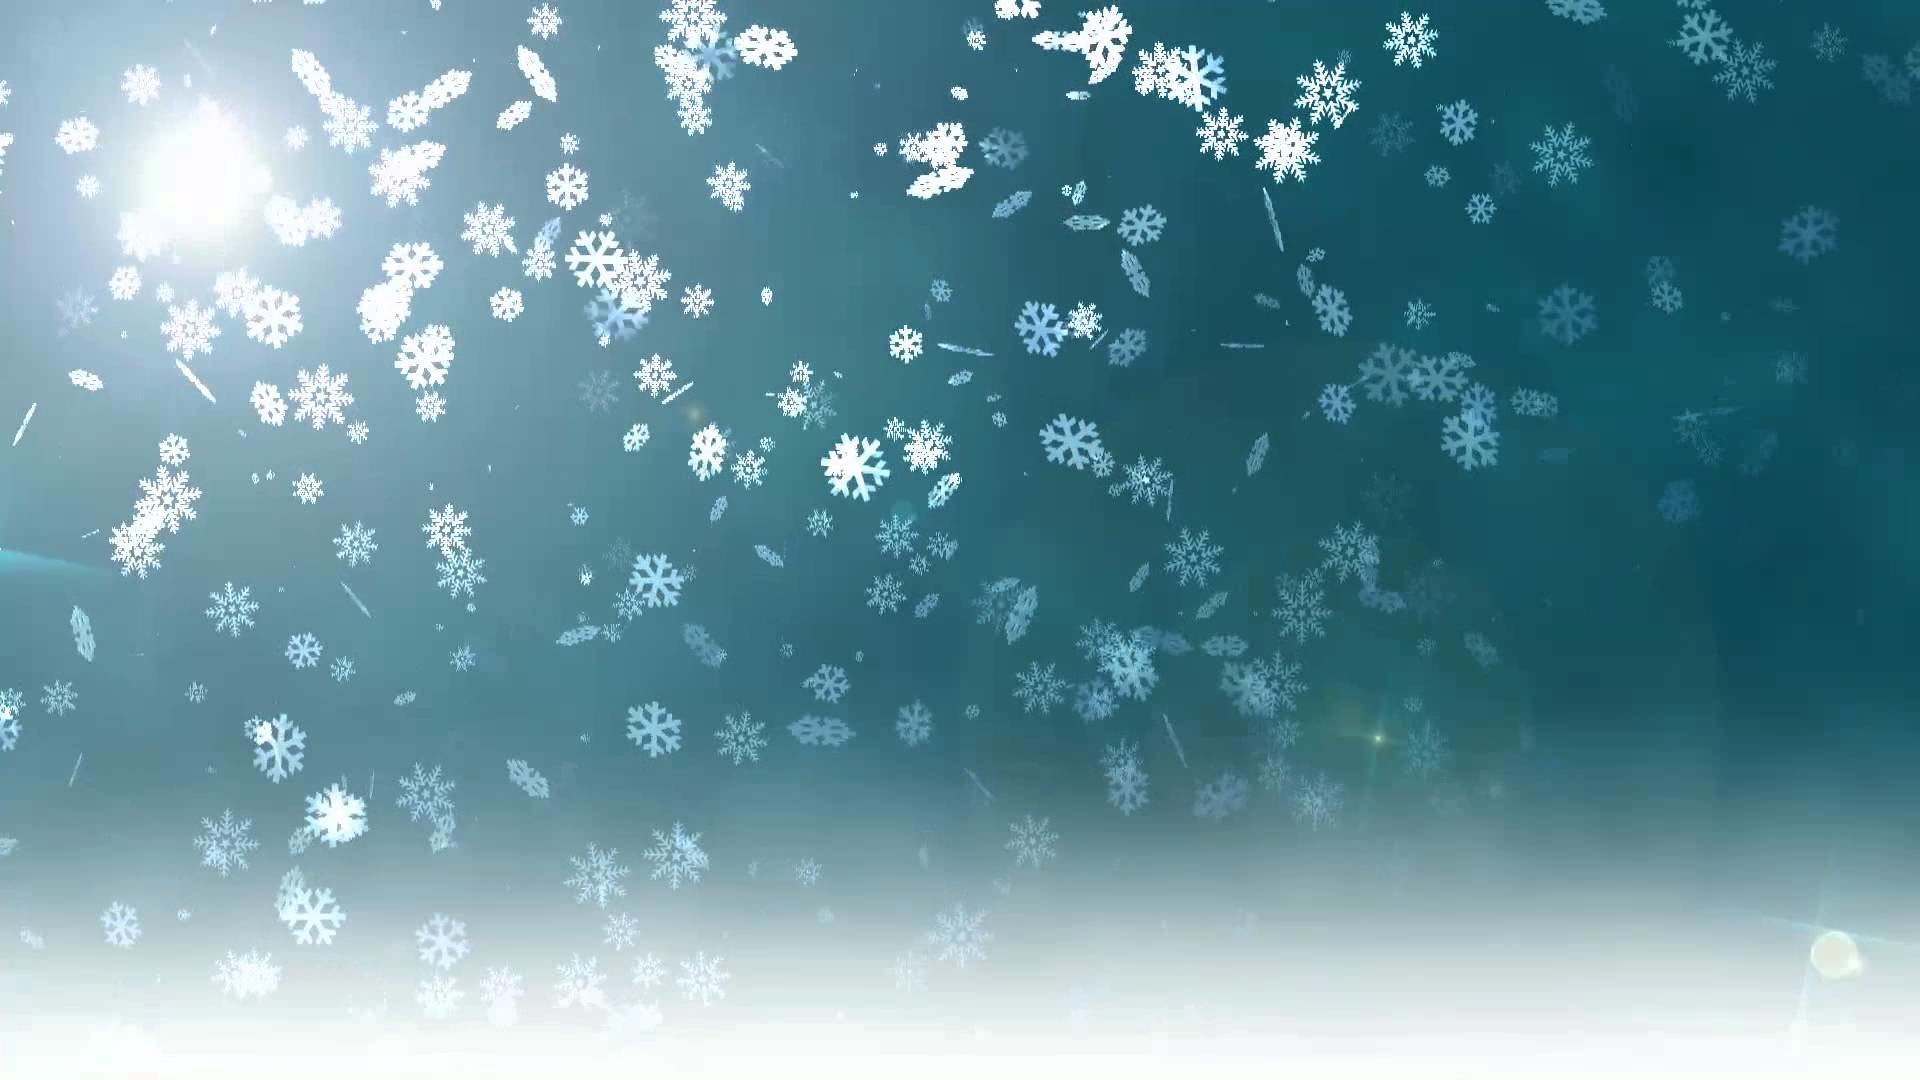 Snowflakes Background (43+ images)